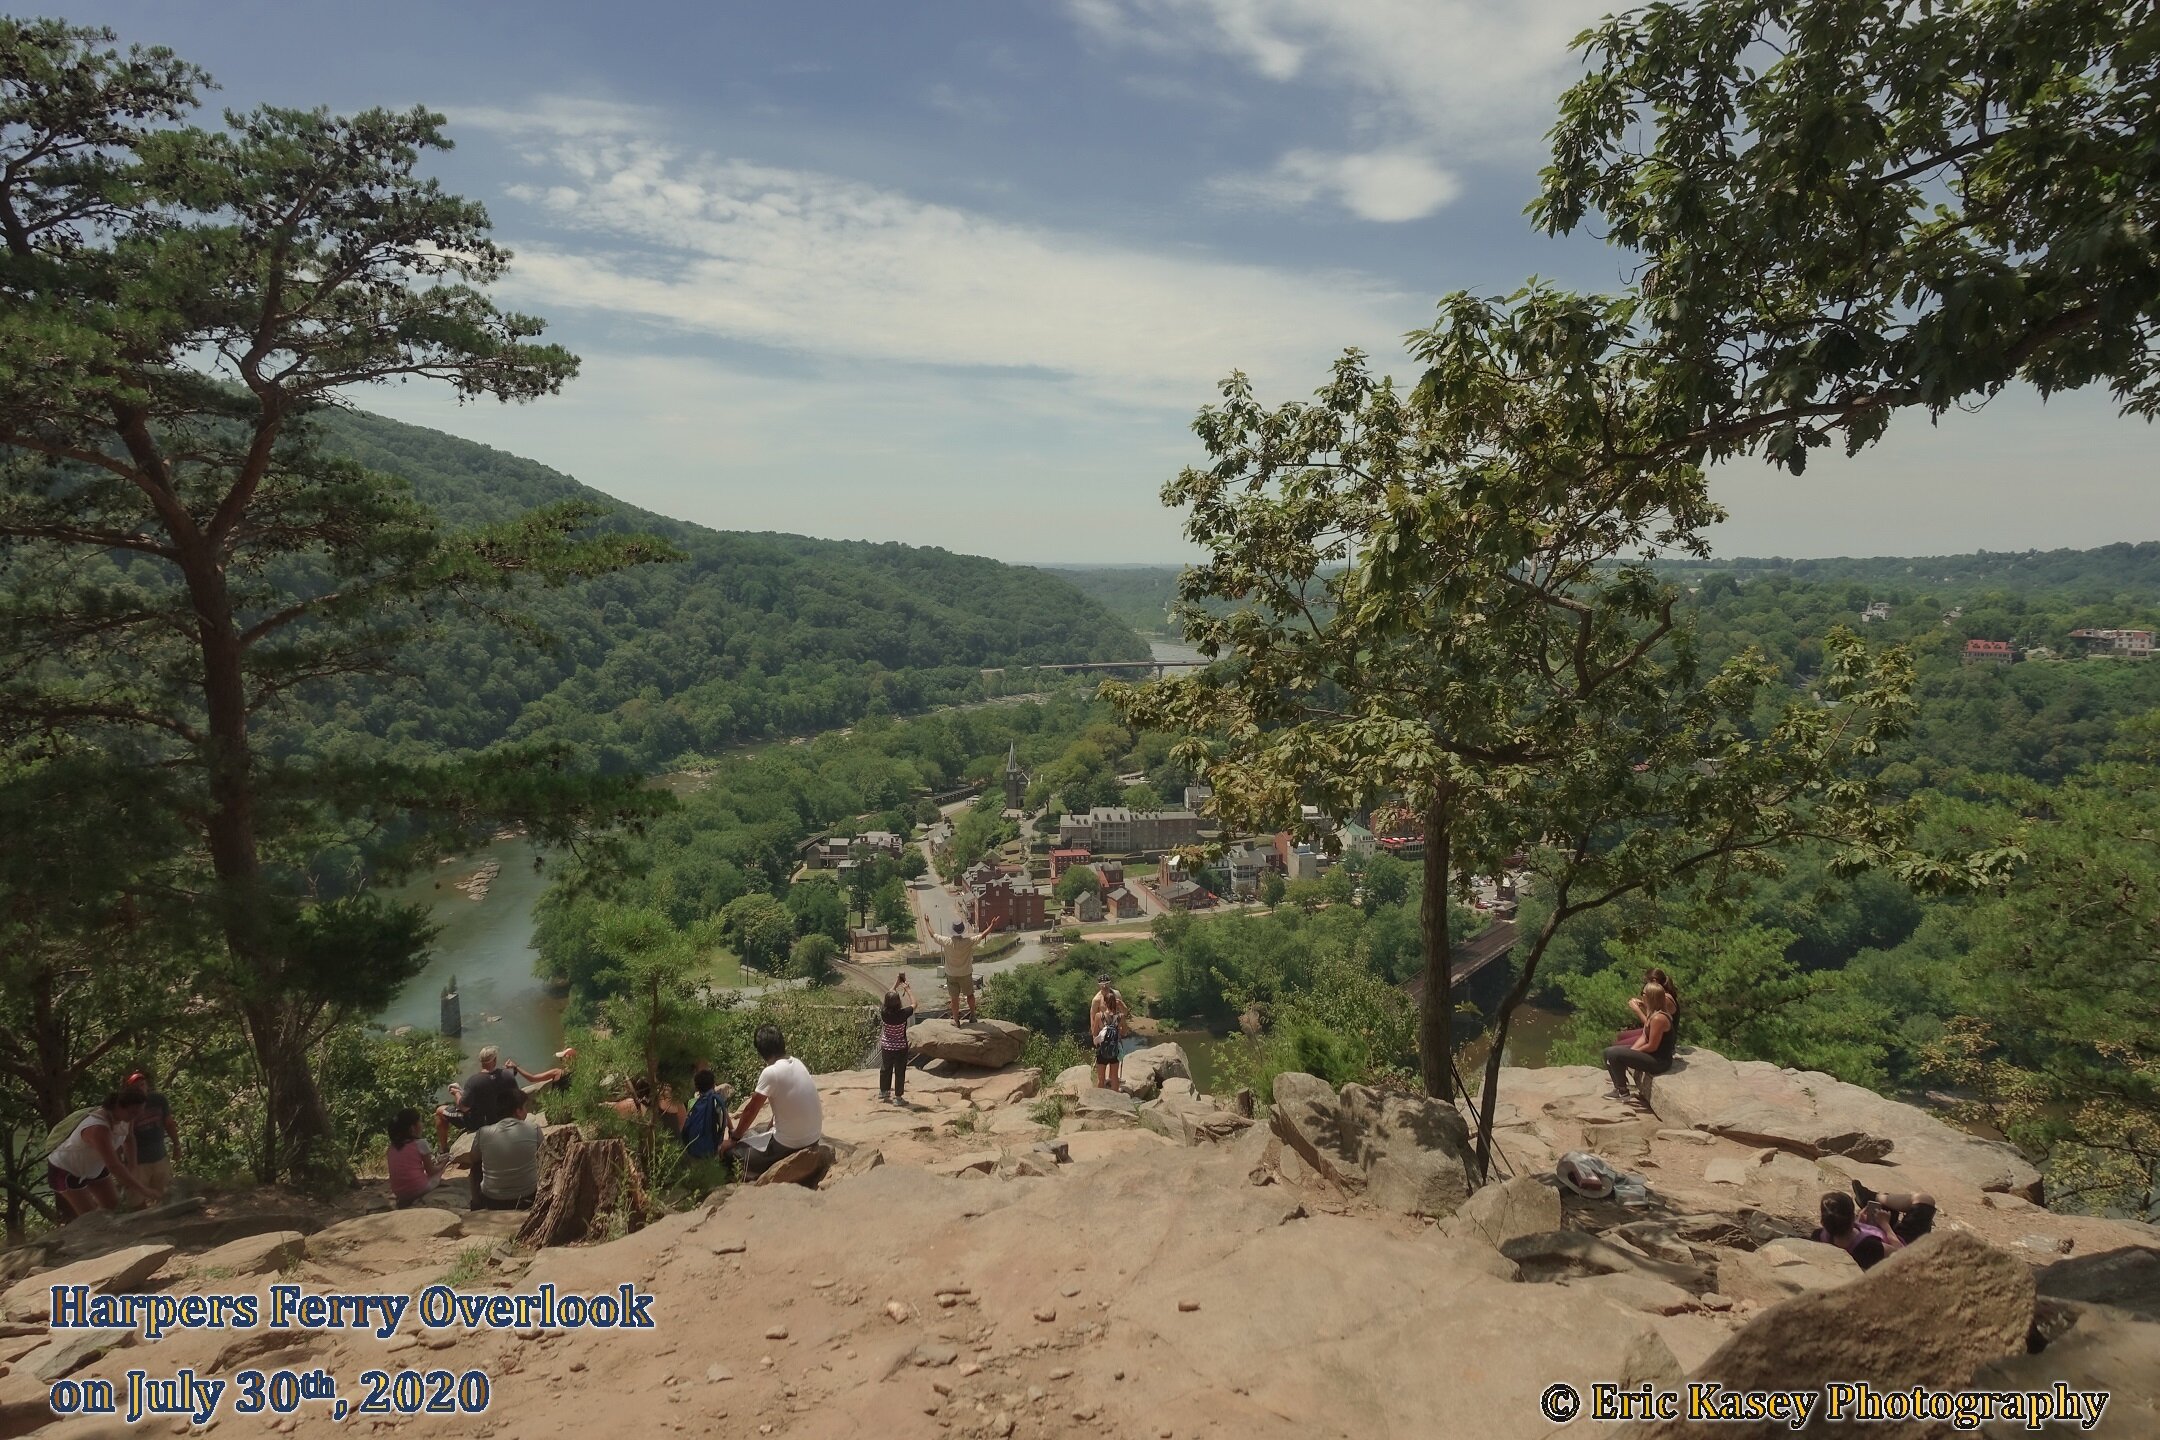 Harpers Ferry Overlook on July 30th, 2020.jpeg